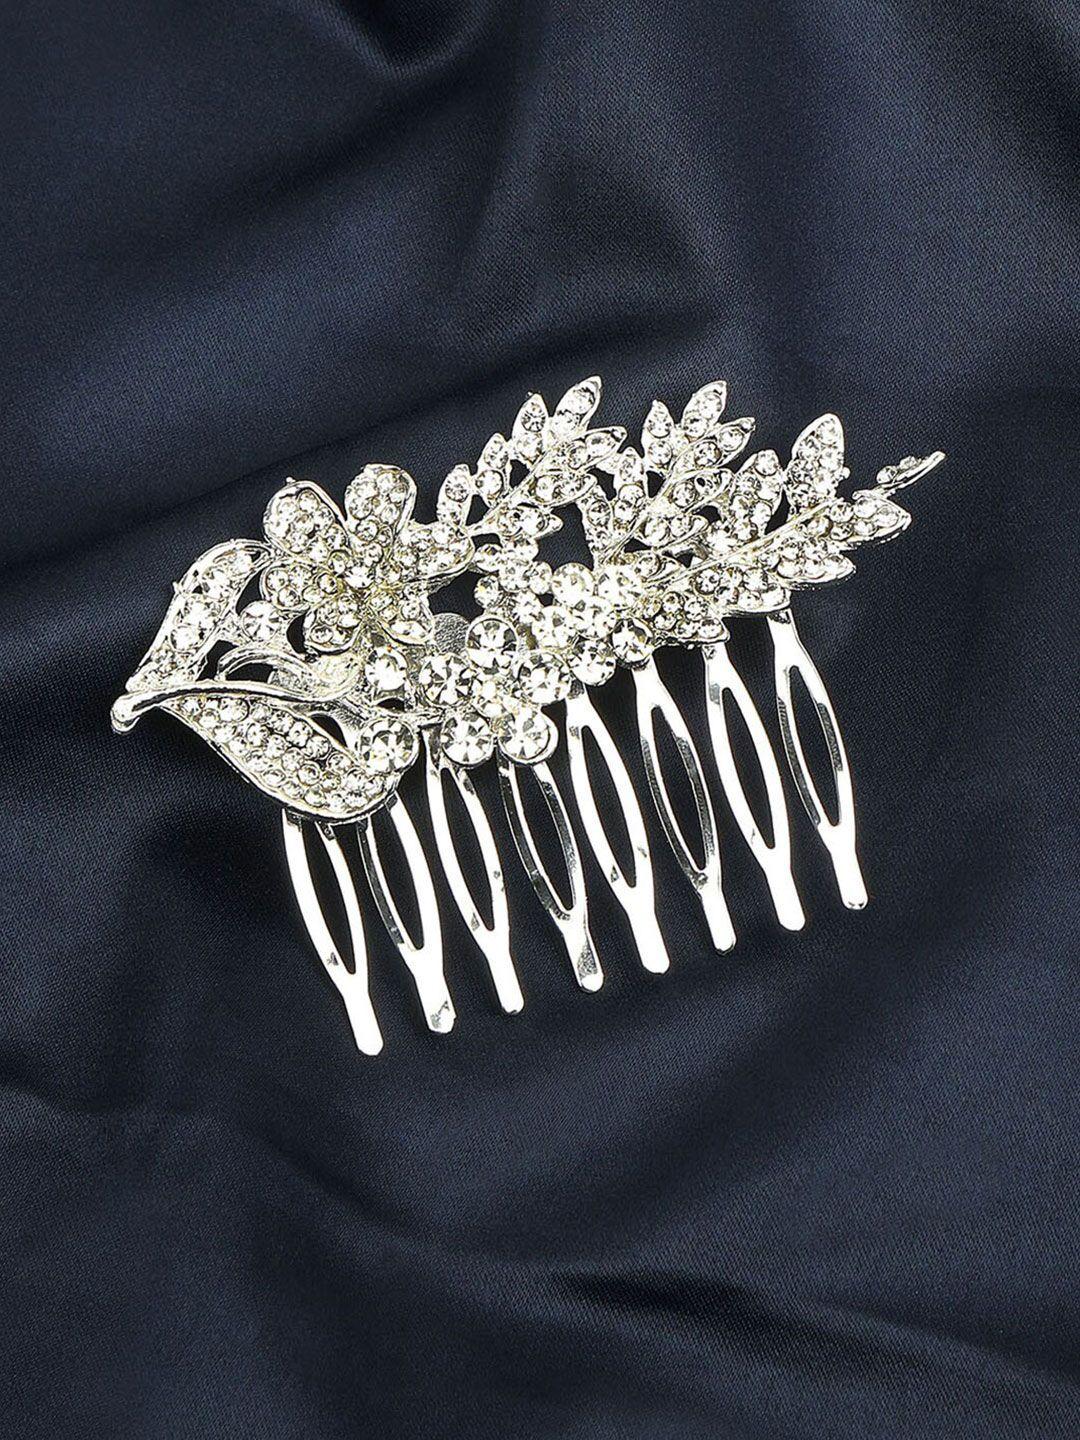 accessher women silver-toned embellished comb pin